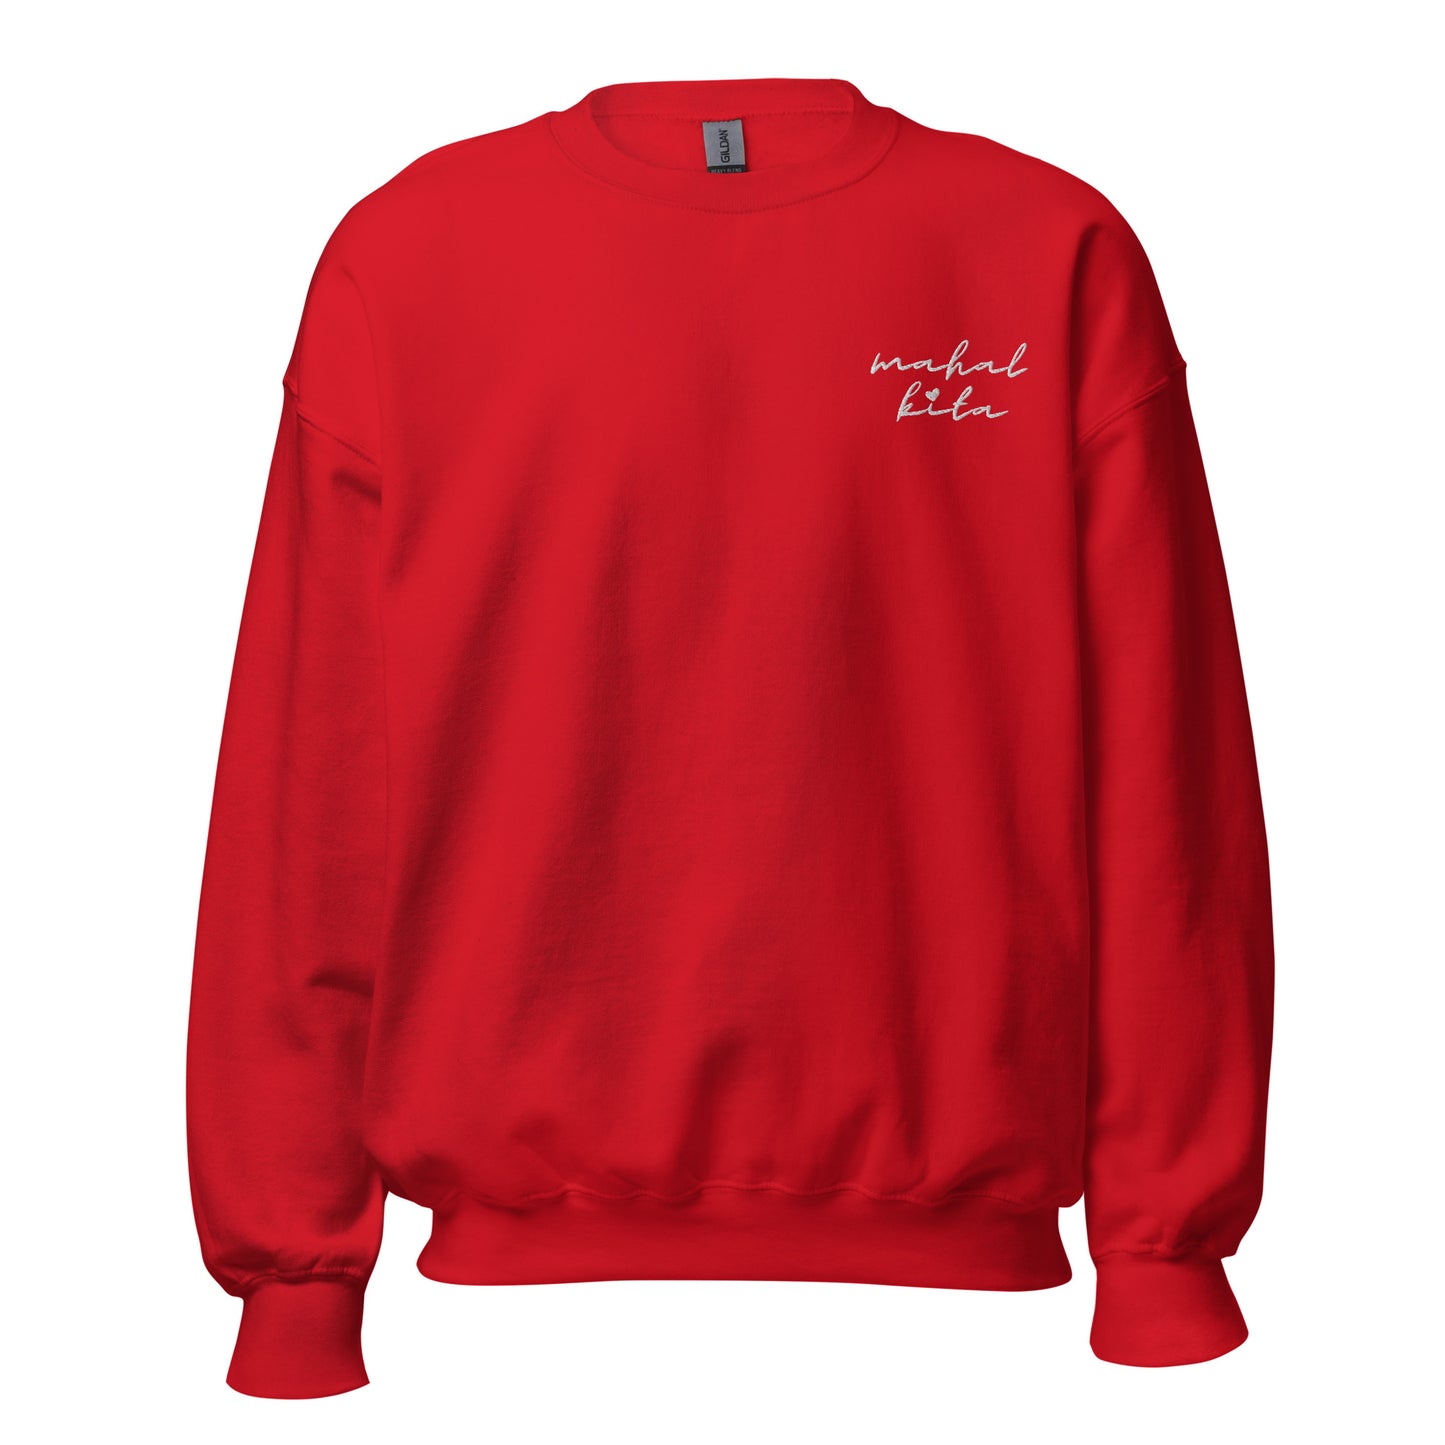 Filipino Sweatshirt Crew Neck Mahal Kita Love You Embroidered Valentine's Day Merch in color variant Red